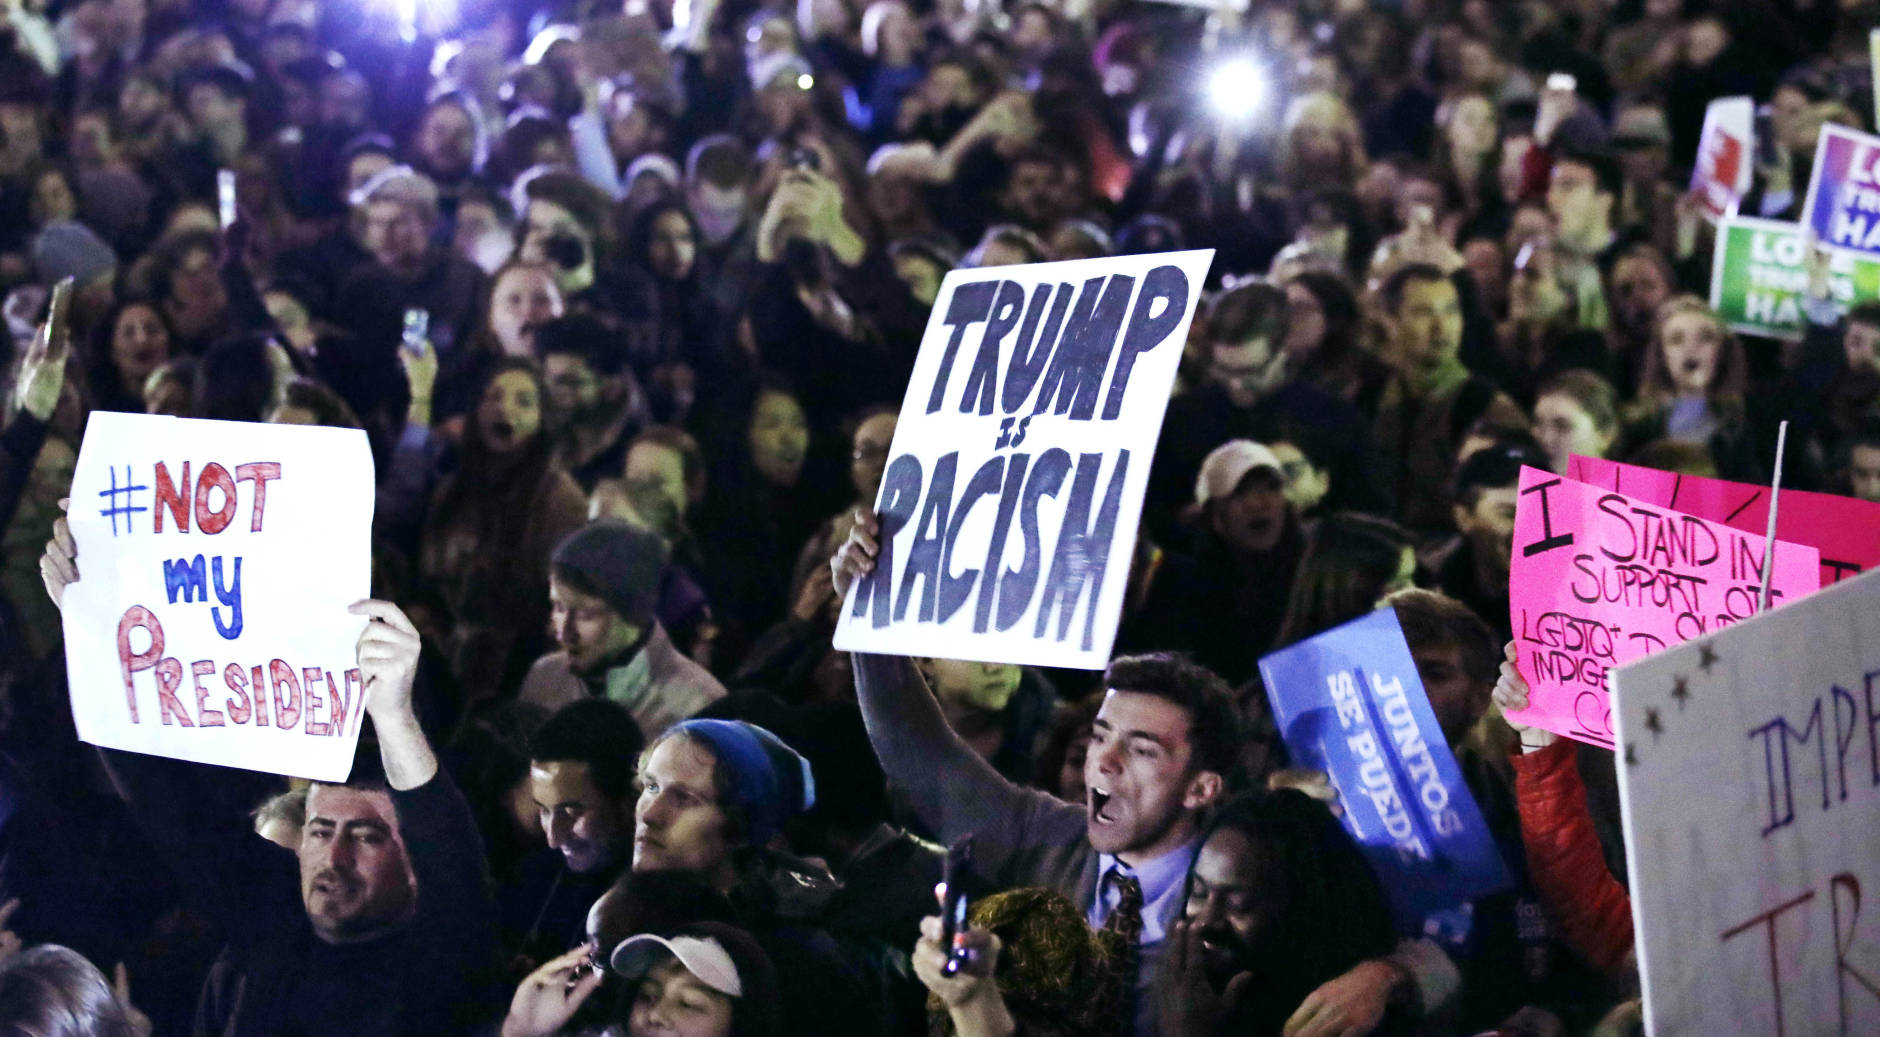 Hundreds protest in opposition of Donald Trump's presidential election victory on Boston Common in Boston, Wednesday evening, Nov. 9, 2016. (AP Photo/Charles Krupa)